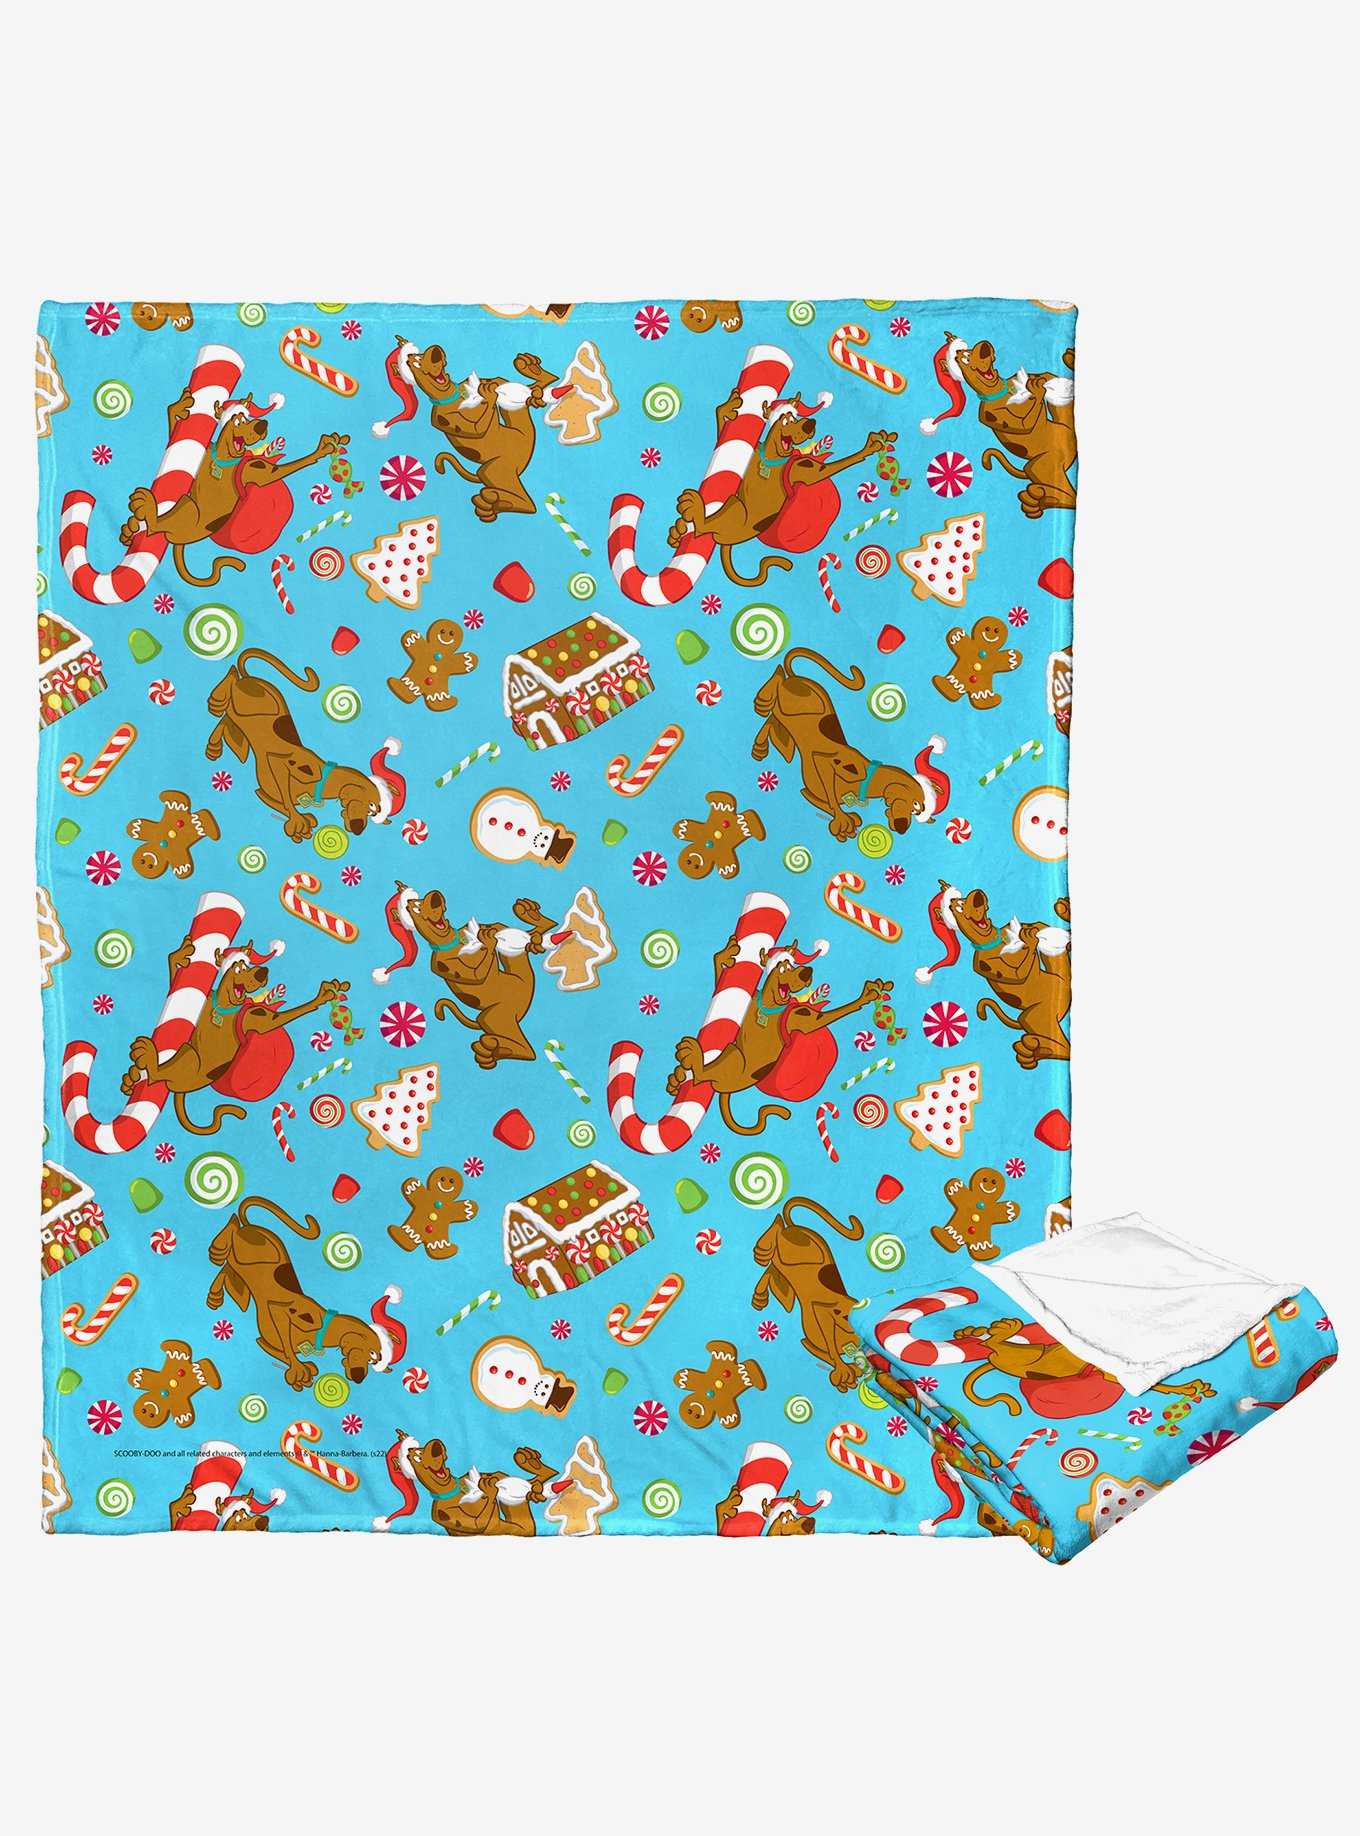 Scooby-Doo! Festive Scooby Sweets Silk Touch Throw Blanket, , hi-res